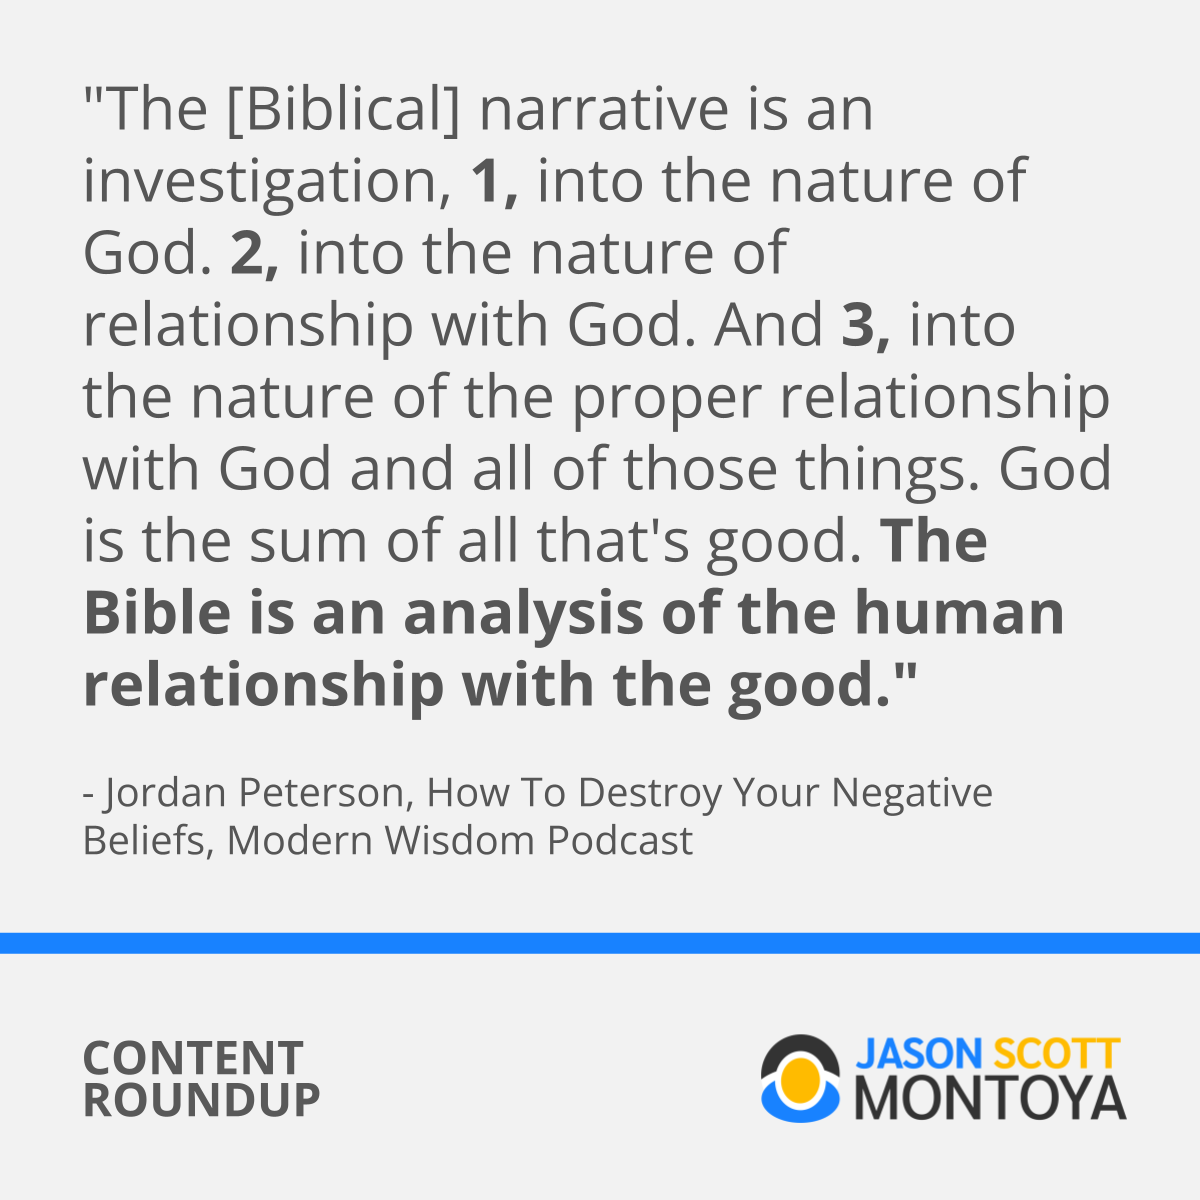 "The [Biblical] narrative is an investigation, 1, into the nature of God. 2, into the nature of relationship with God. And 3, into the nature of the proper relationship with God and all of those things. God is the sum of all that's good. The Bible is an analysis of the human relationship with the good."  - Jordan Peterson, How To Destroy Your Negative Beliefs, Modern Wisdom Podcast